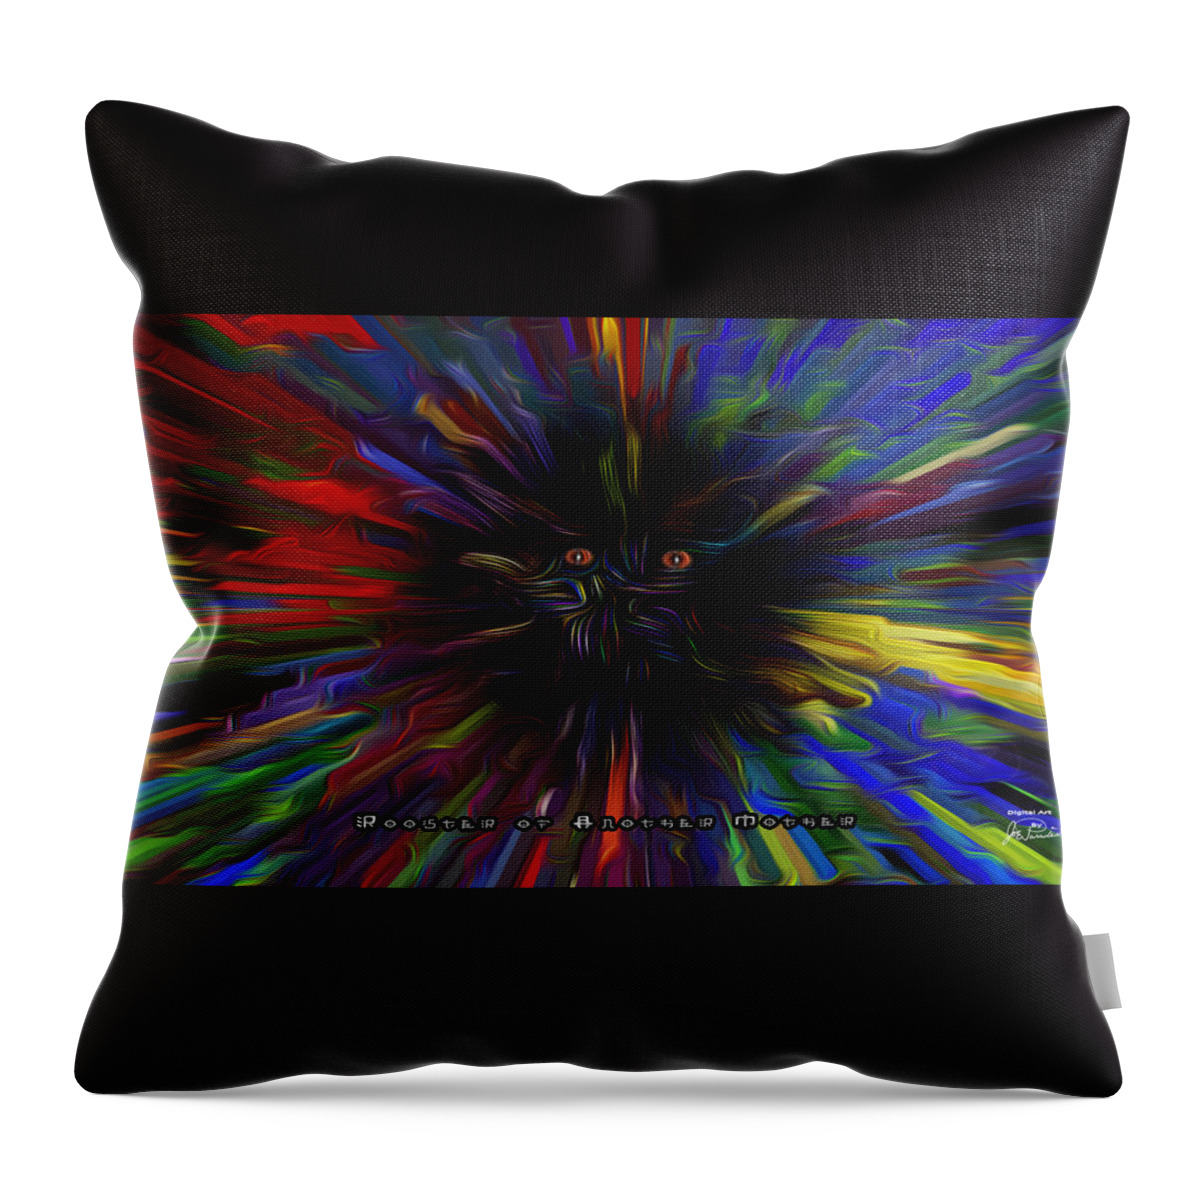 Chickens Throw Pillow featuring the digital art Rooster of Another Mother by Joe Paradis